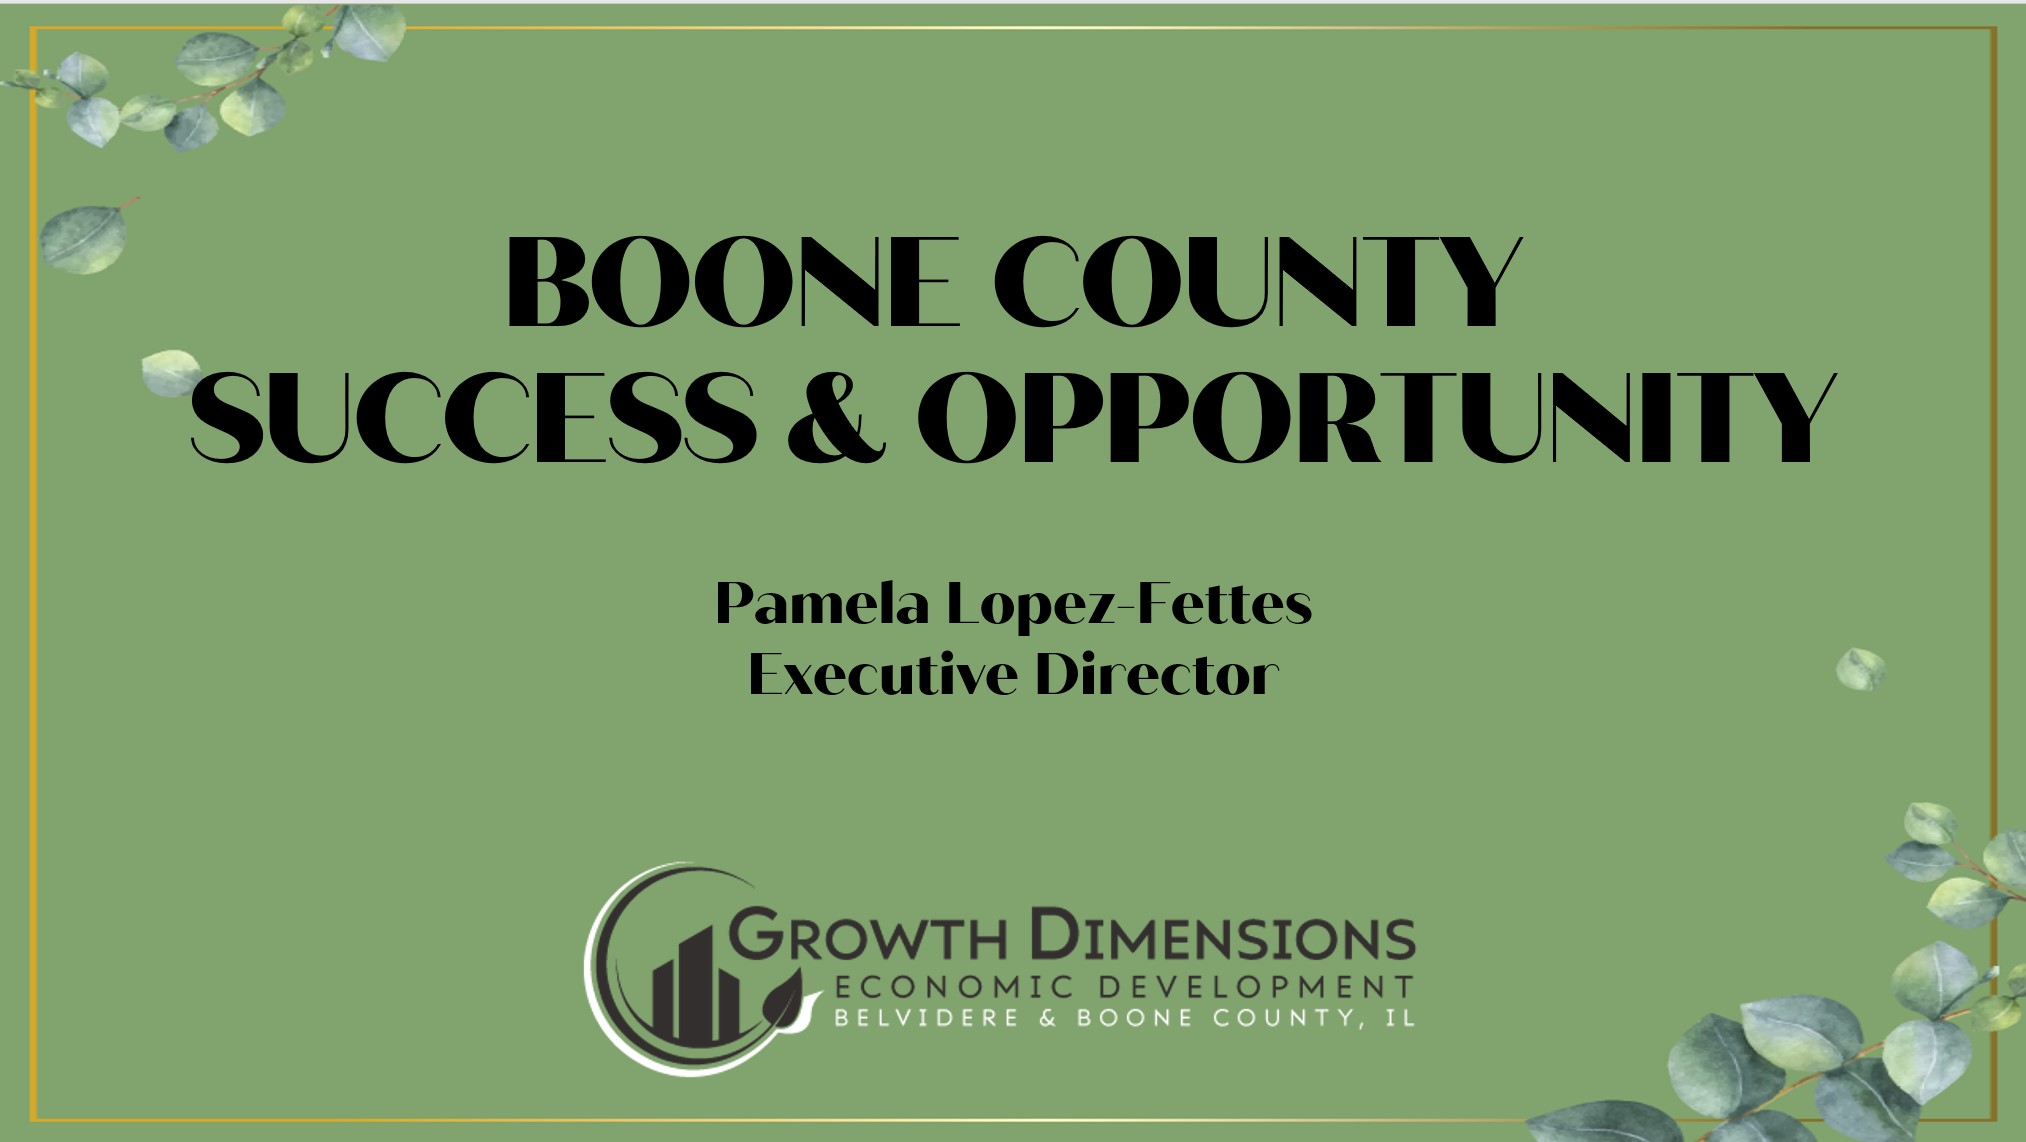 SUCCESS AND OPPORTUNITY IN BOONE COUNTY ILLINOIS Photo